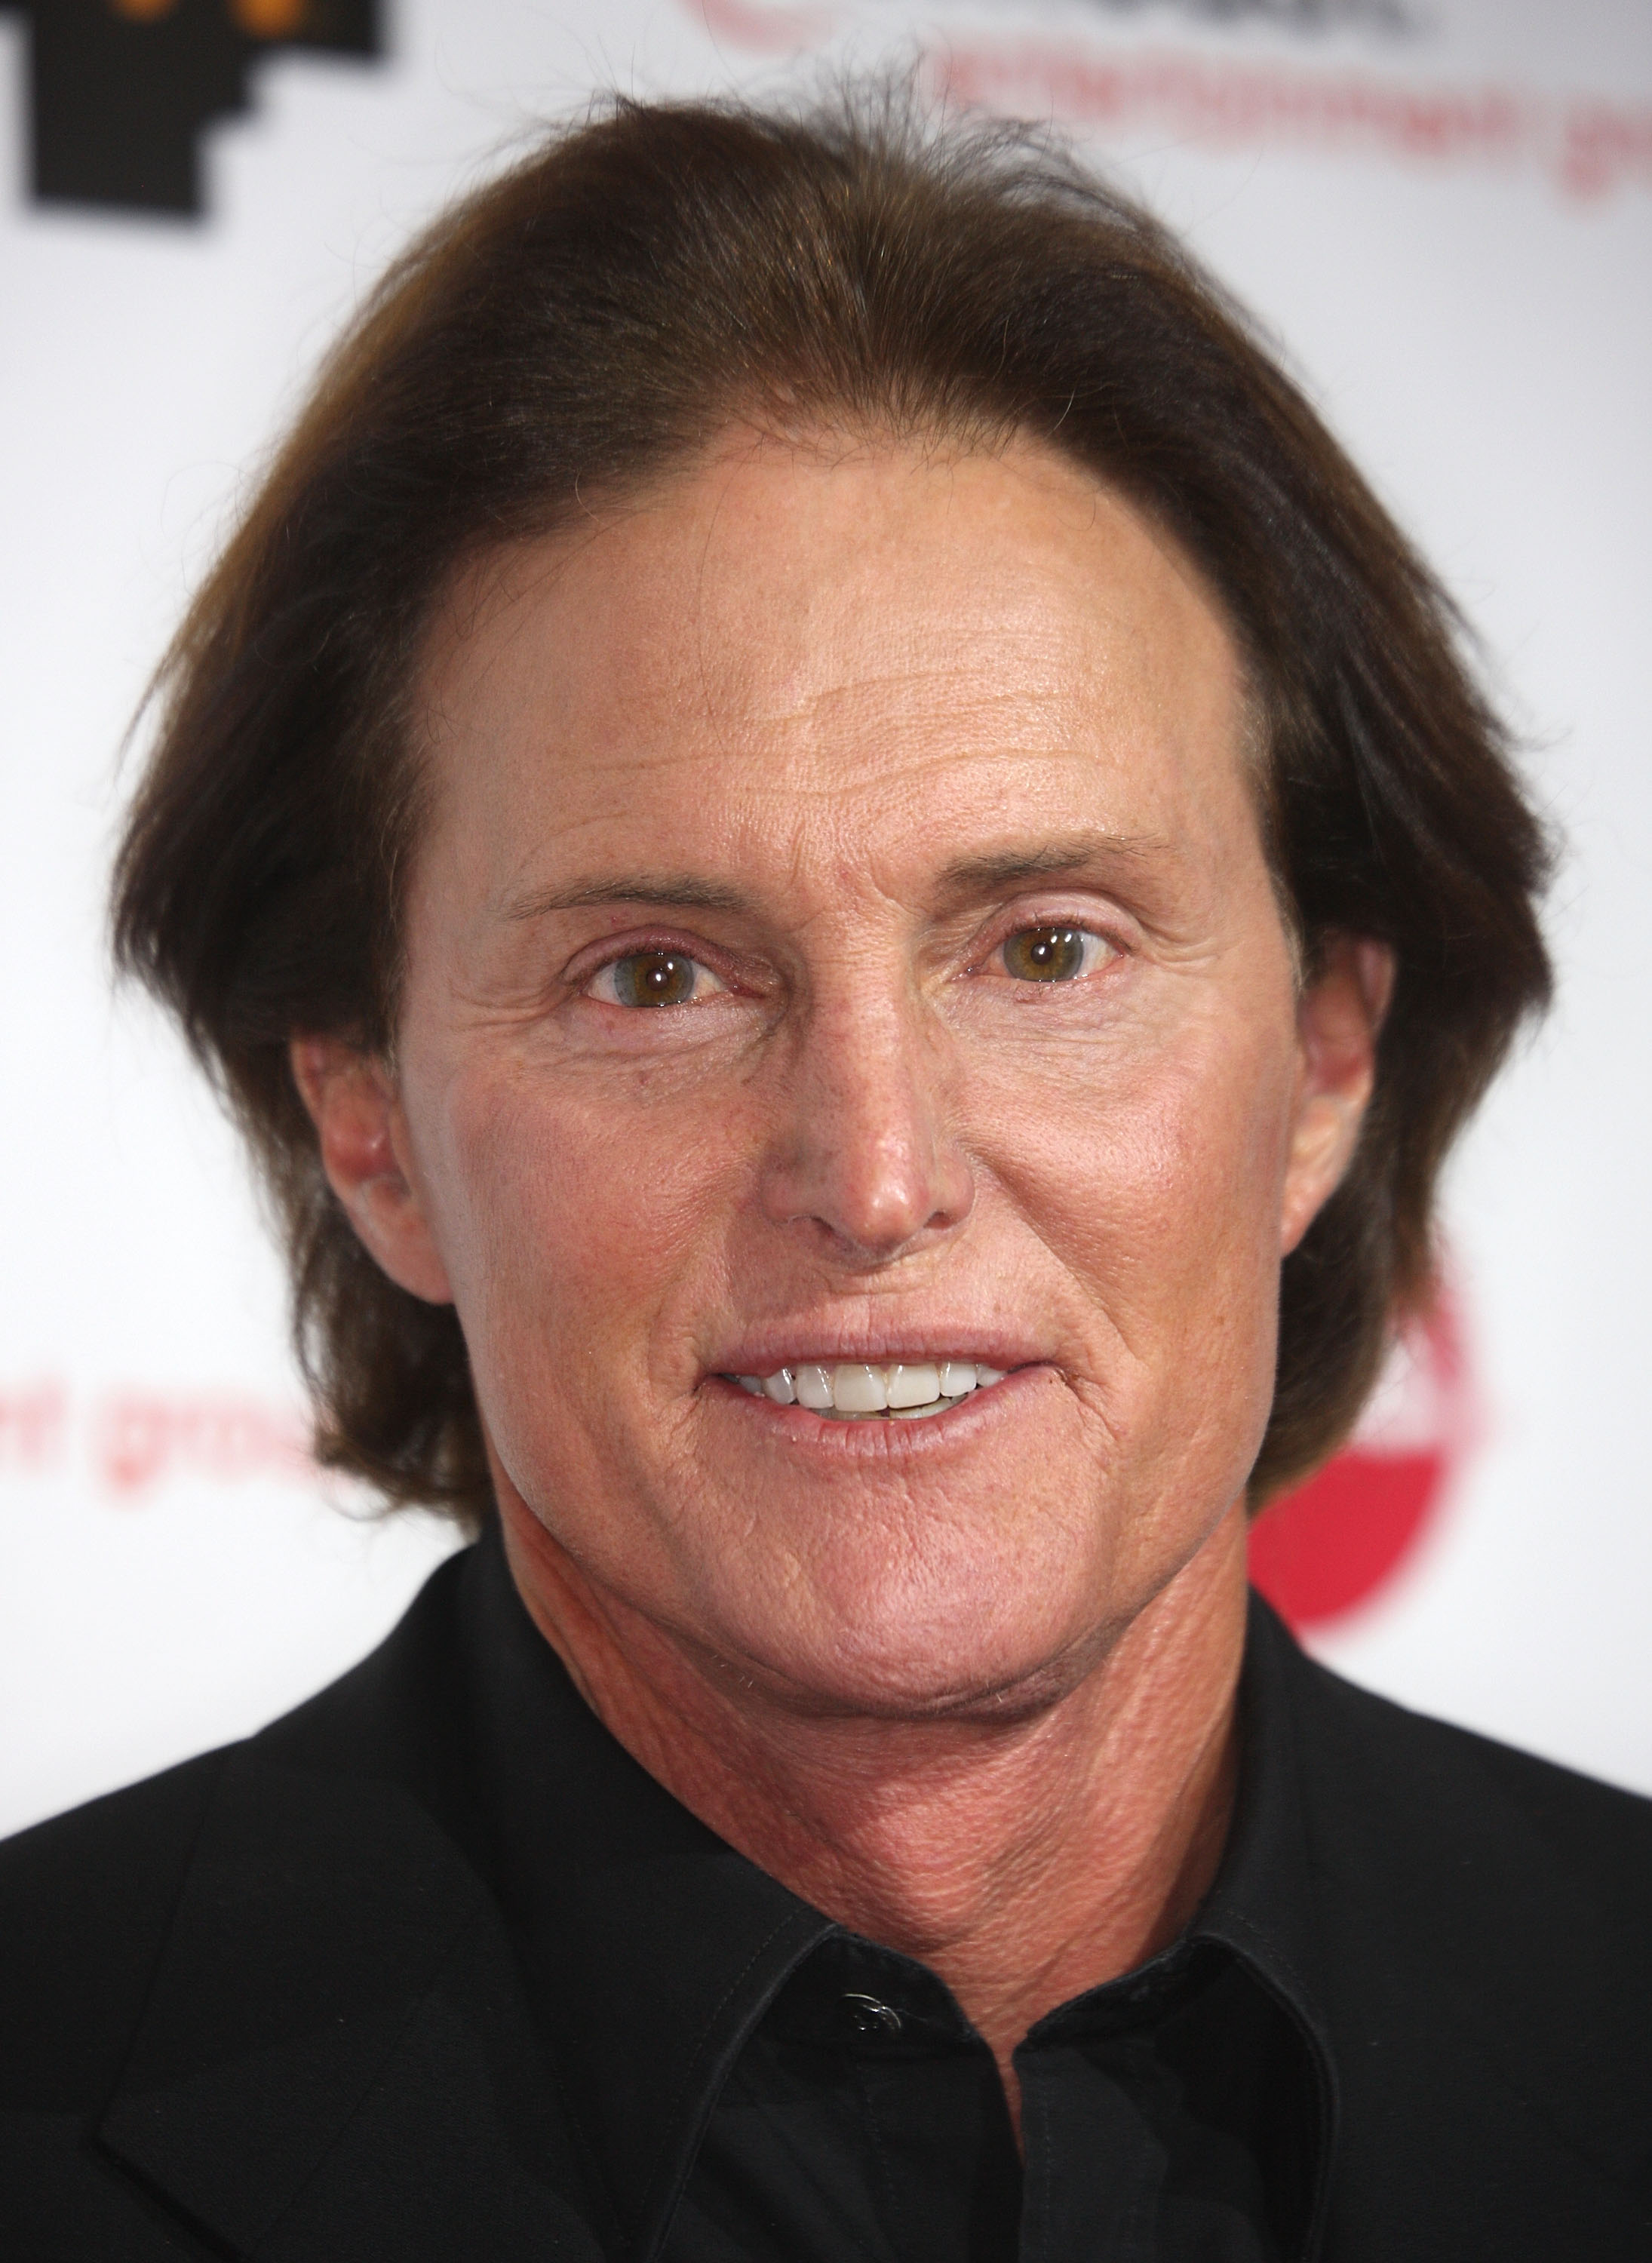 On 'Keeping Up With The Kardashians' Special, Bruce Jenner Talks ...